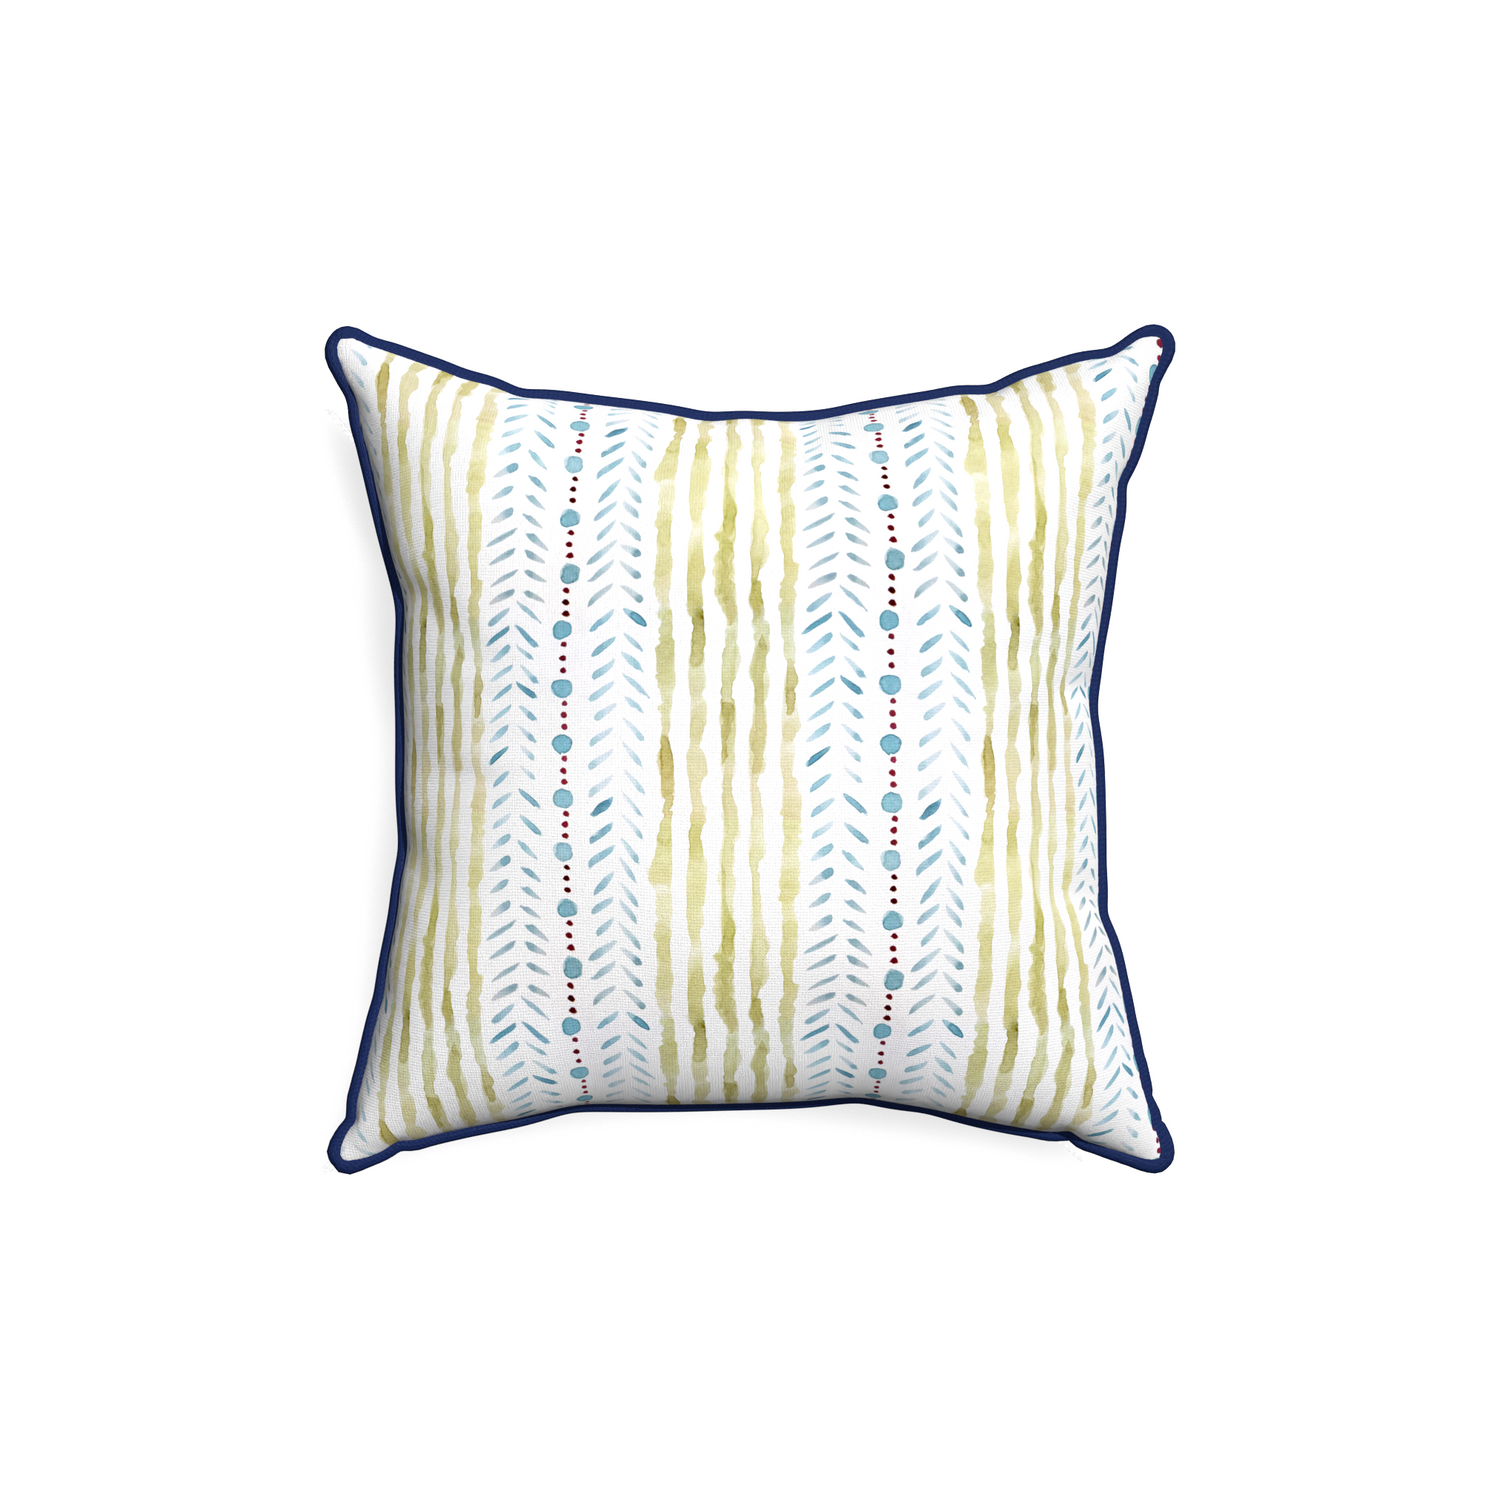 18-square julia custom pillow with midnight piping on white background